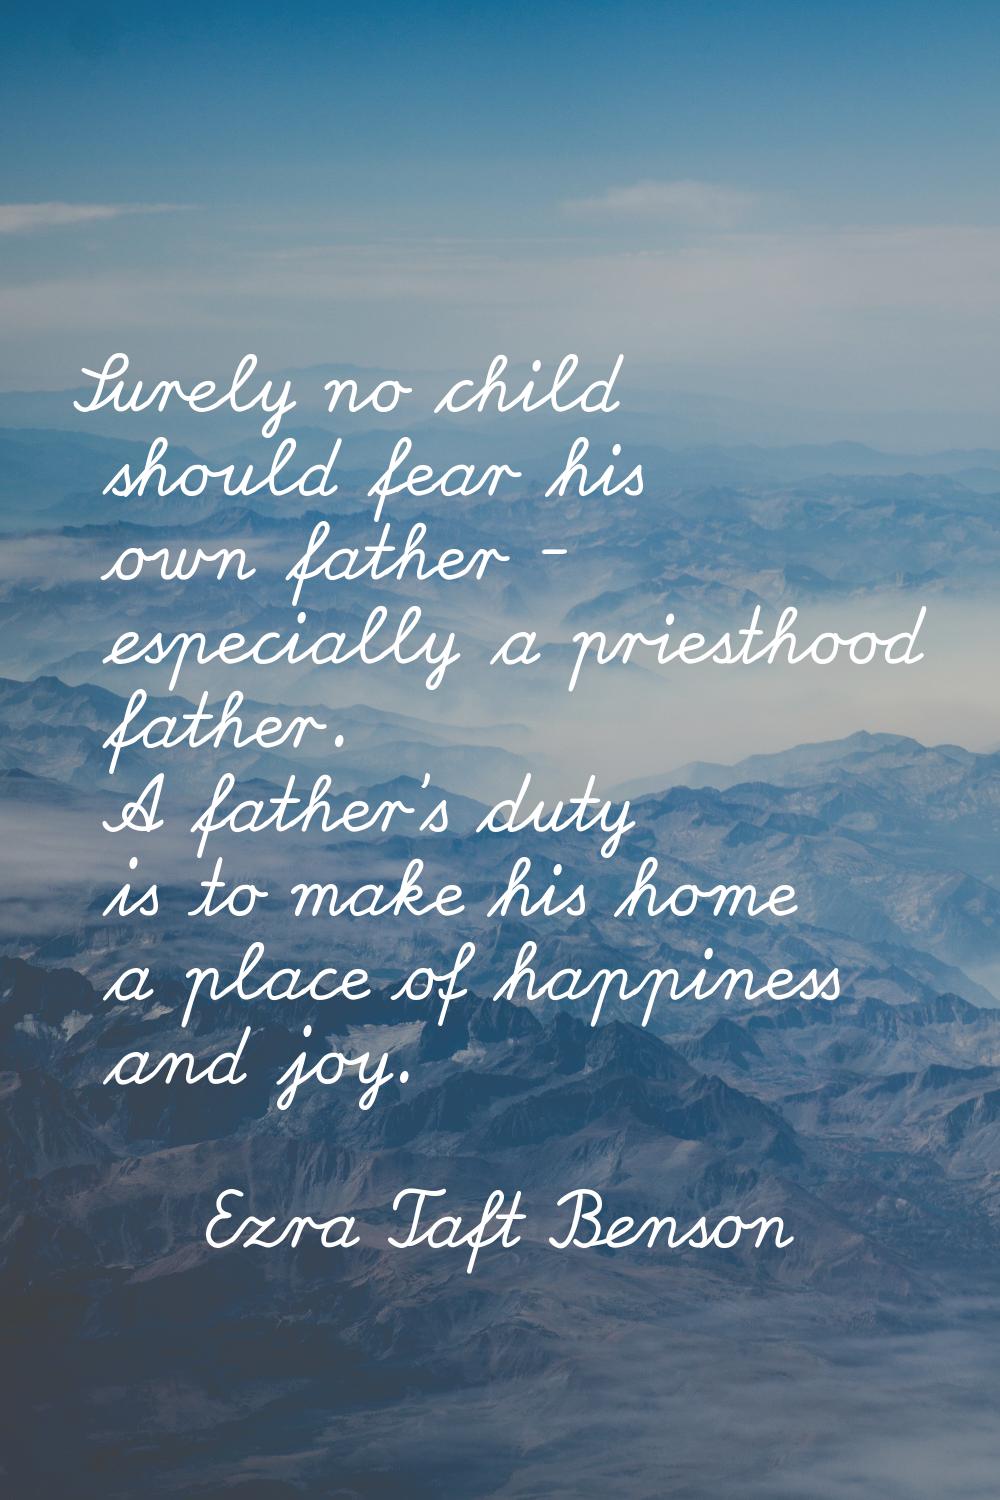 Surely no child should fear his own father - especially a priesthood father. A father's duty is to 